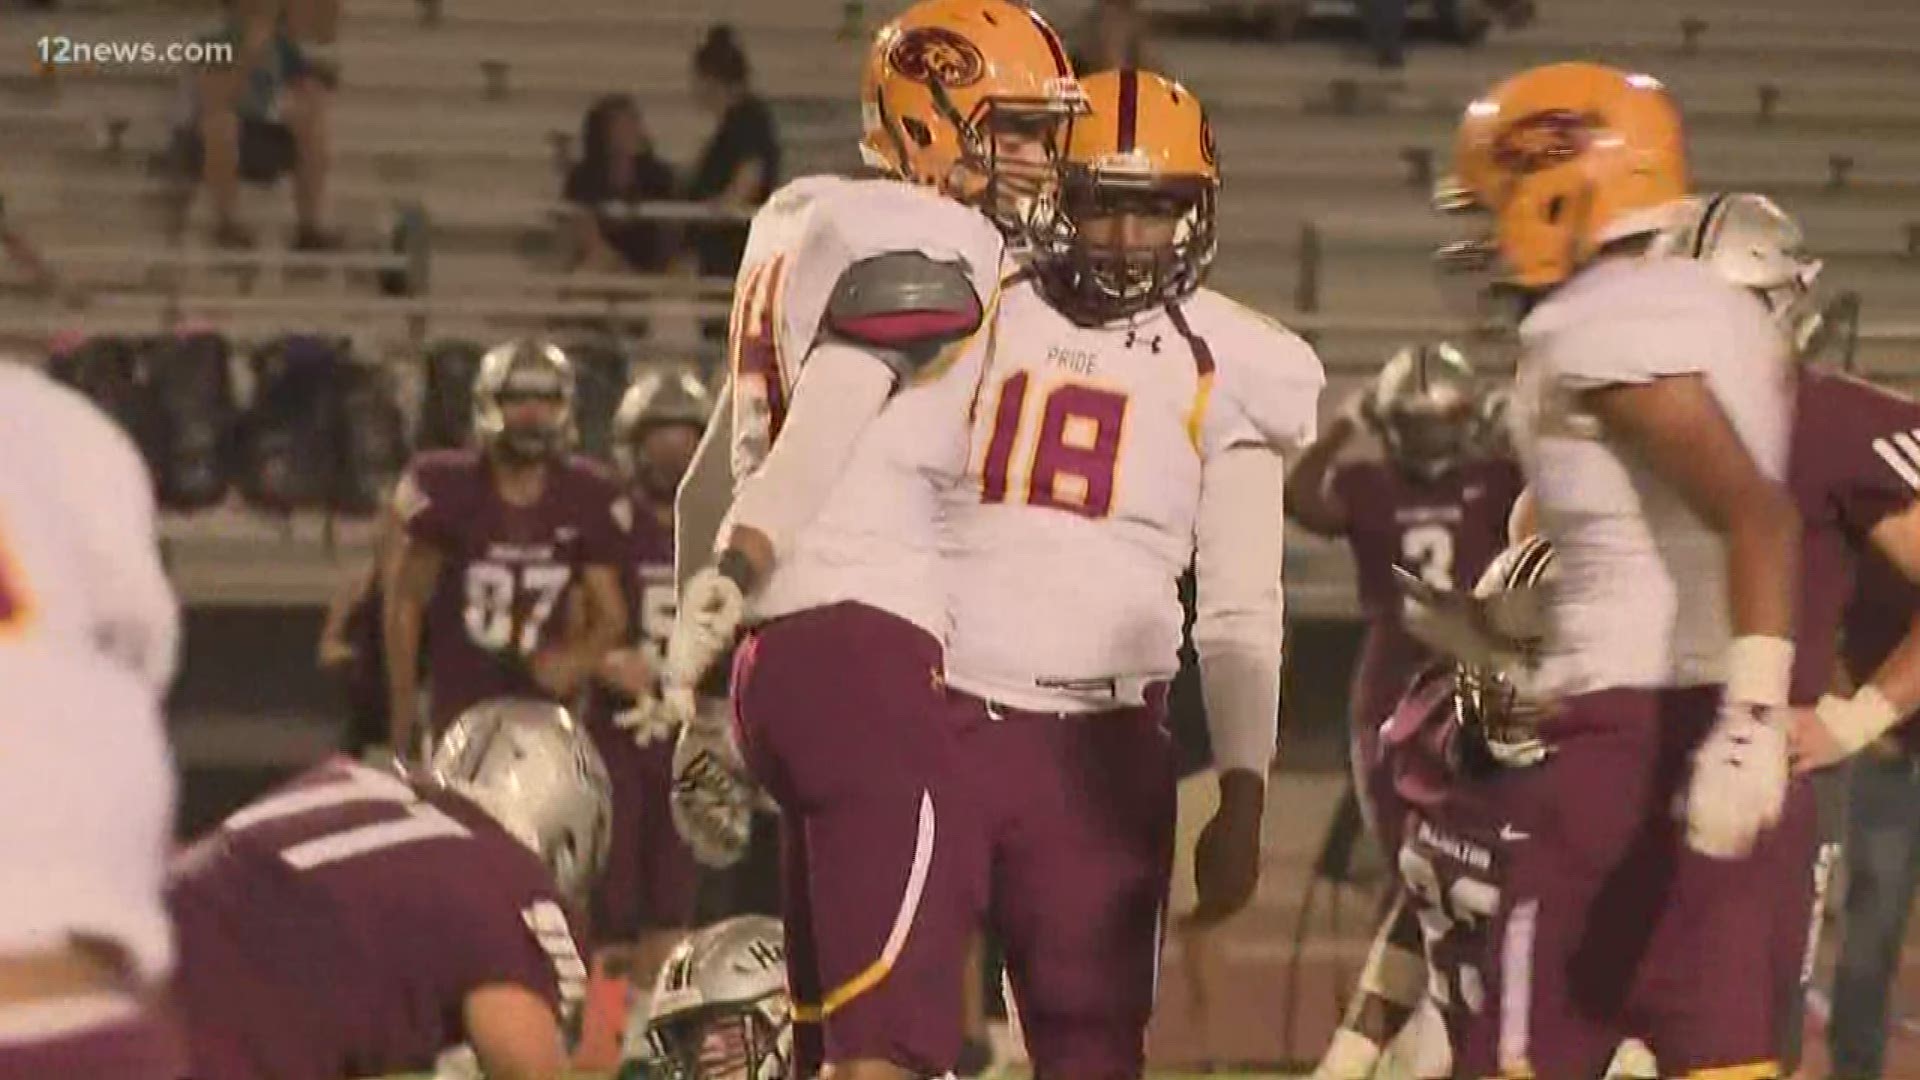 A week of scandal is coming to an end at Mountain Pointe High School after one of the most bizarre stories of betrayal in Arizona high school football history.